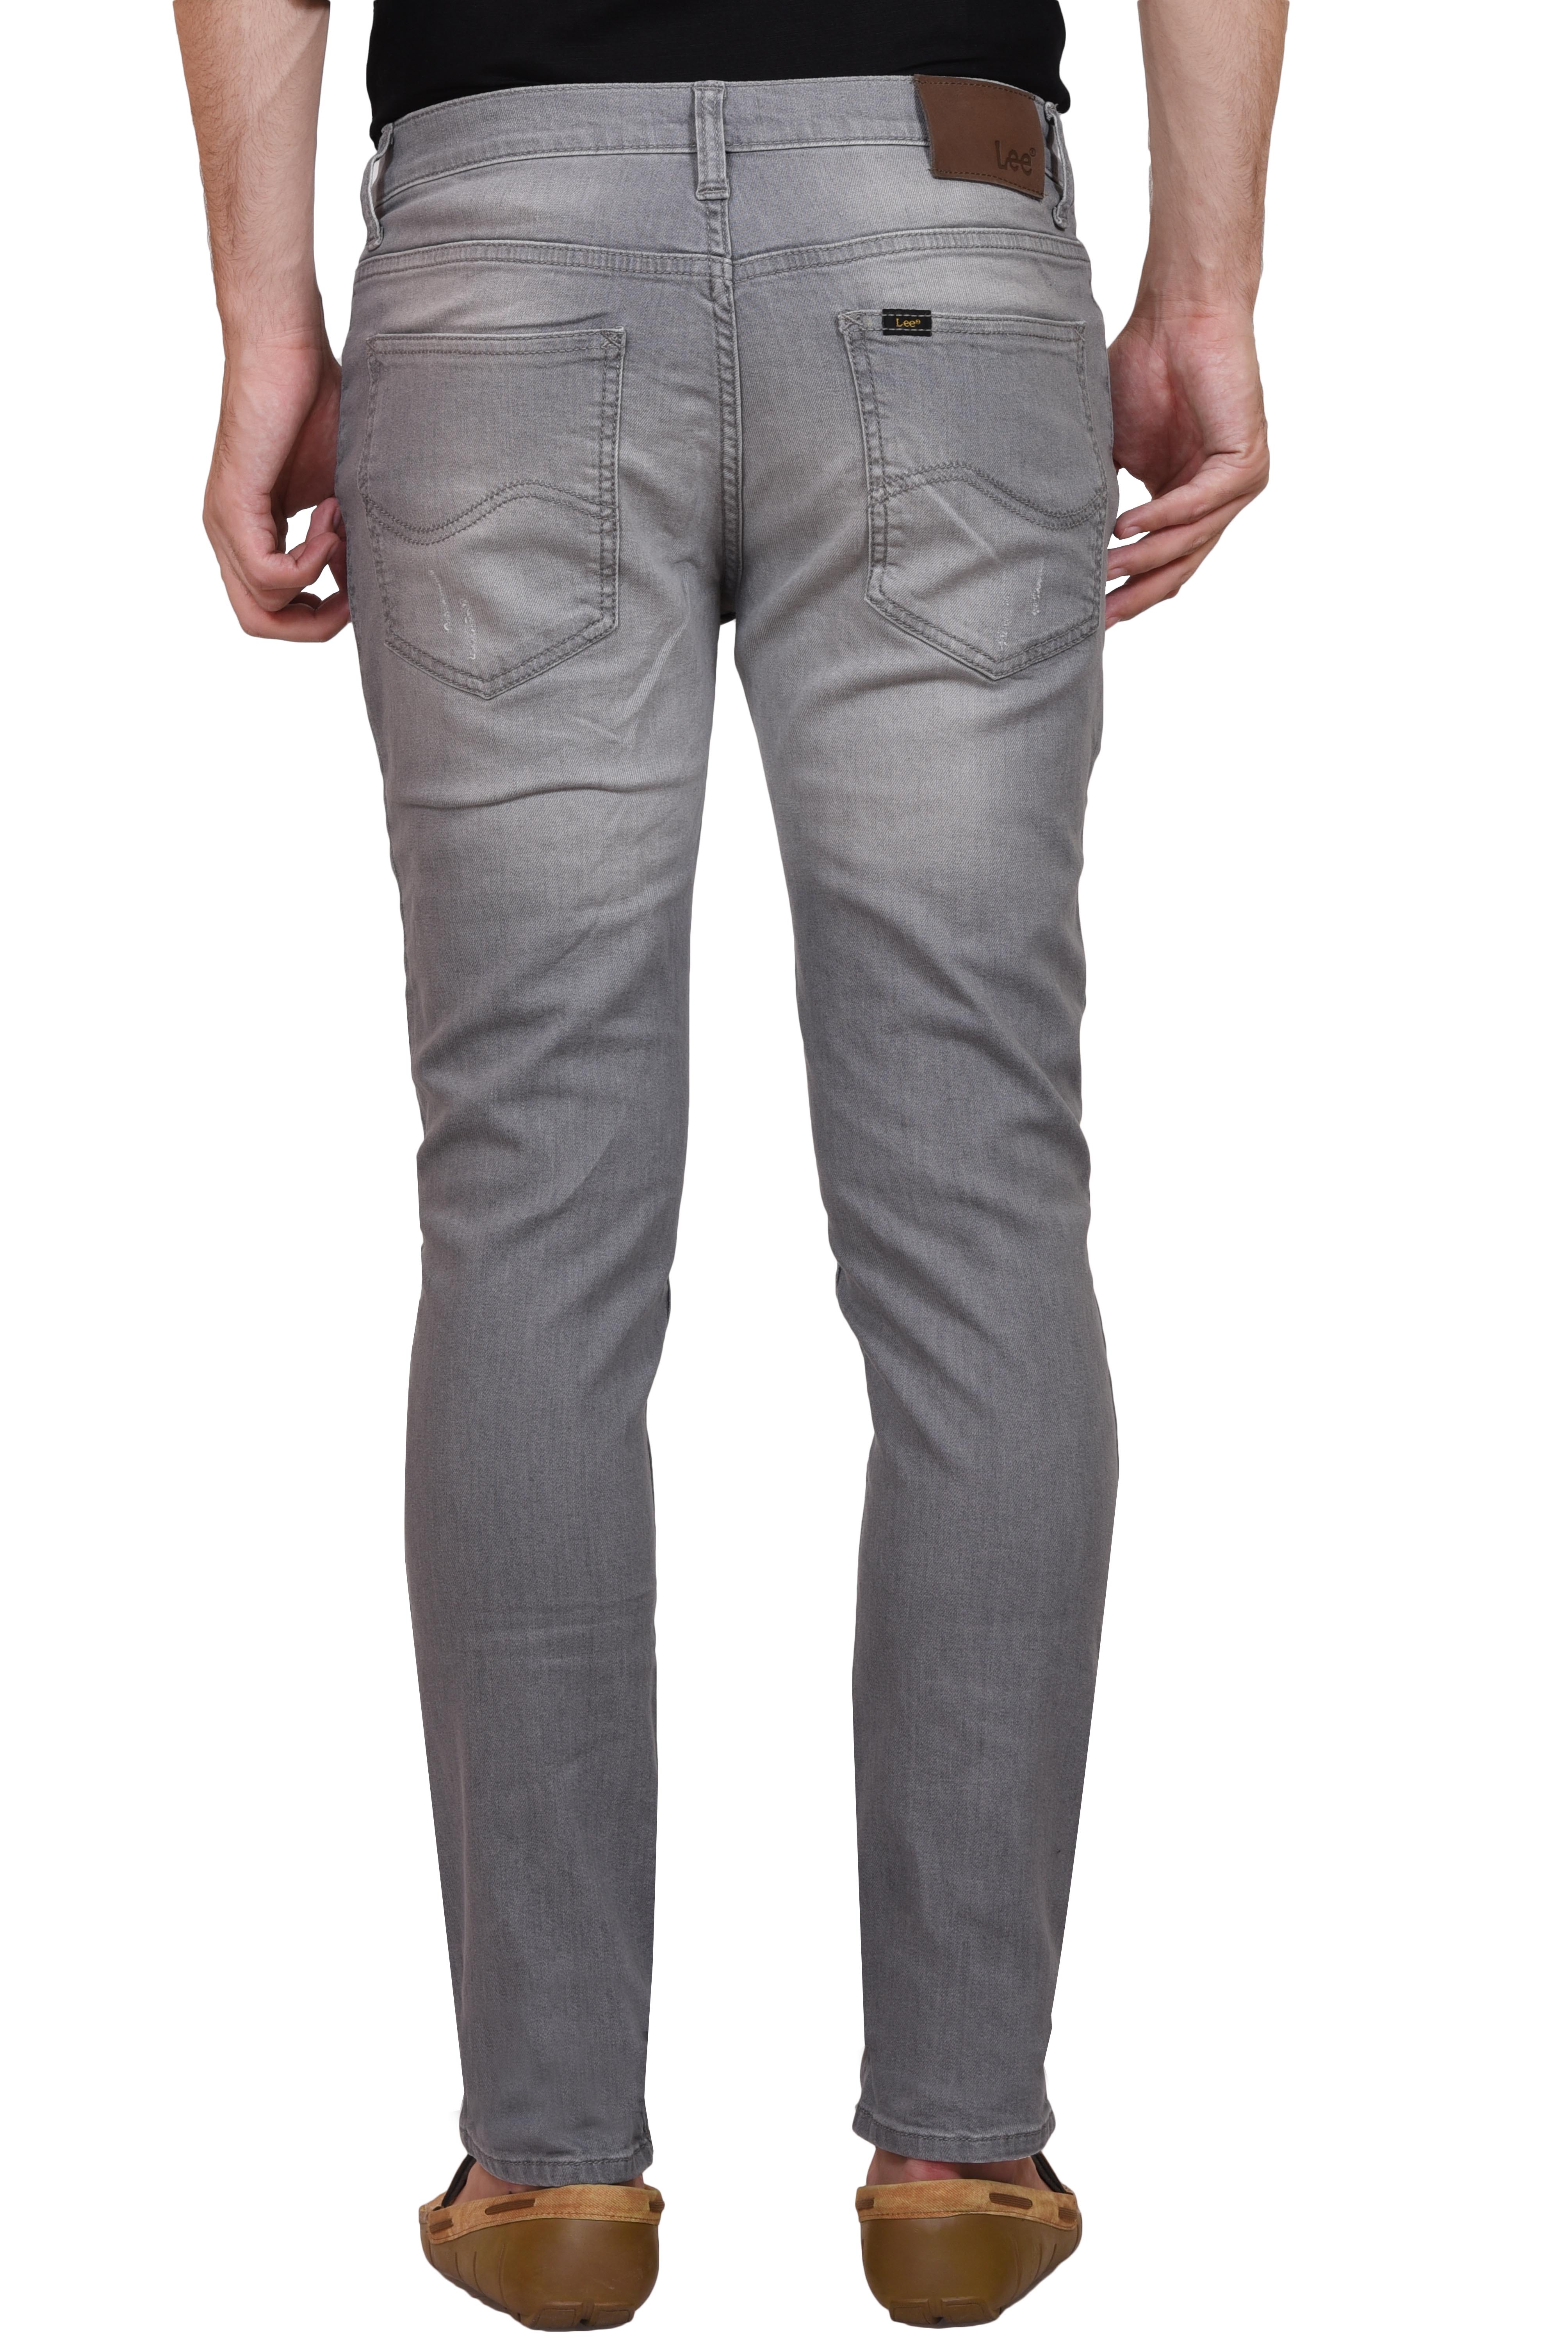 Buy Lee Men's Gray Skinny Fit Jeans Online @ ₹1379 from ShopClues